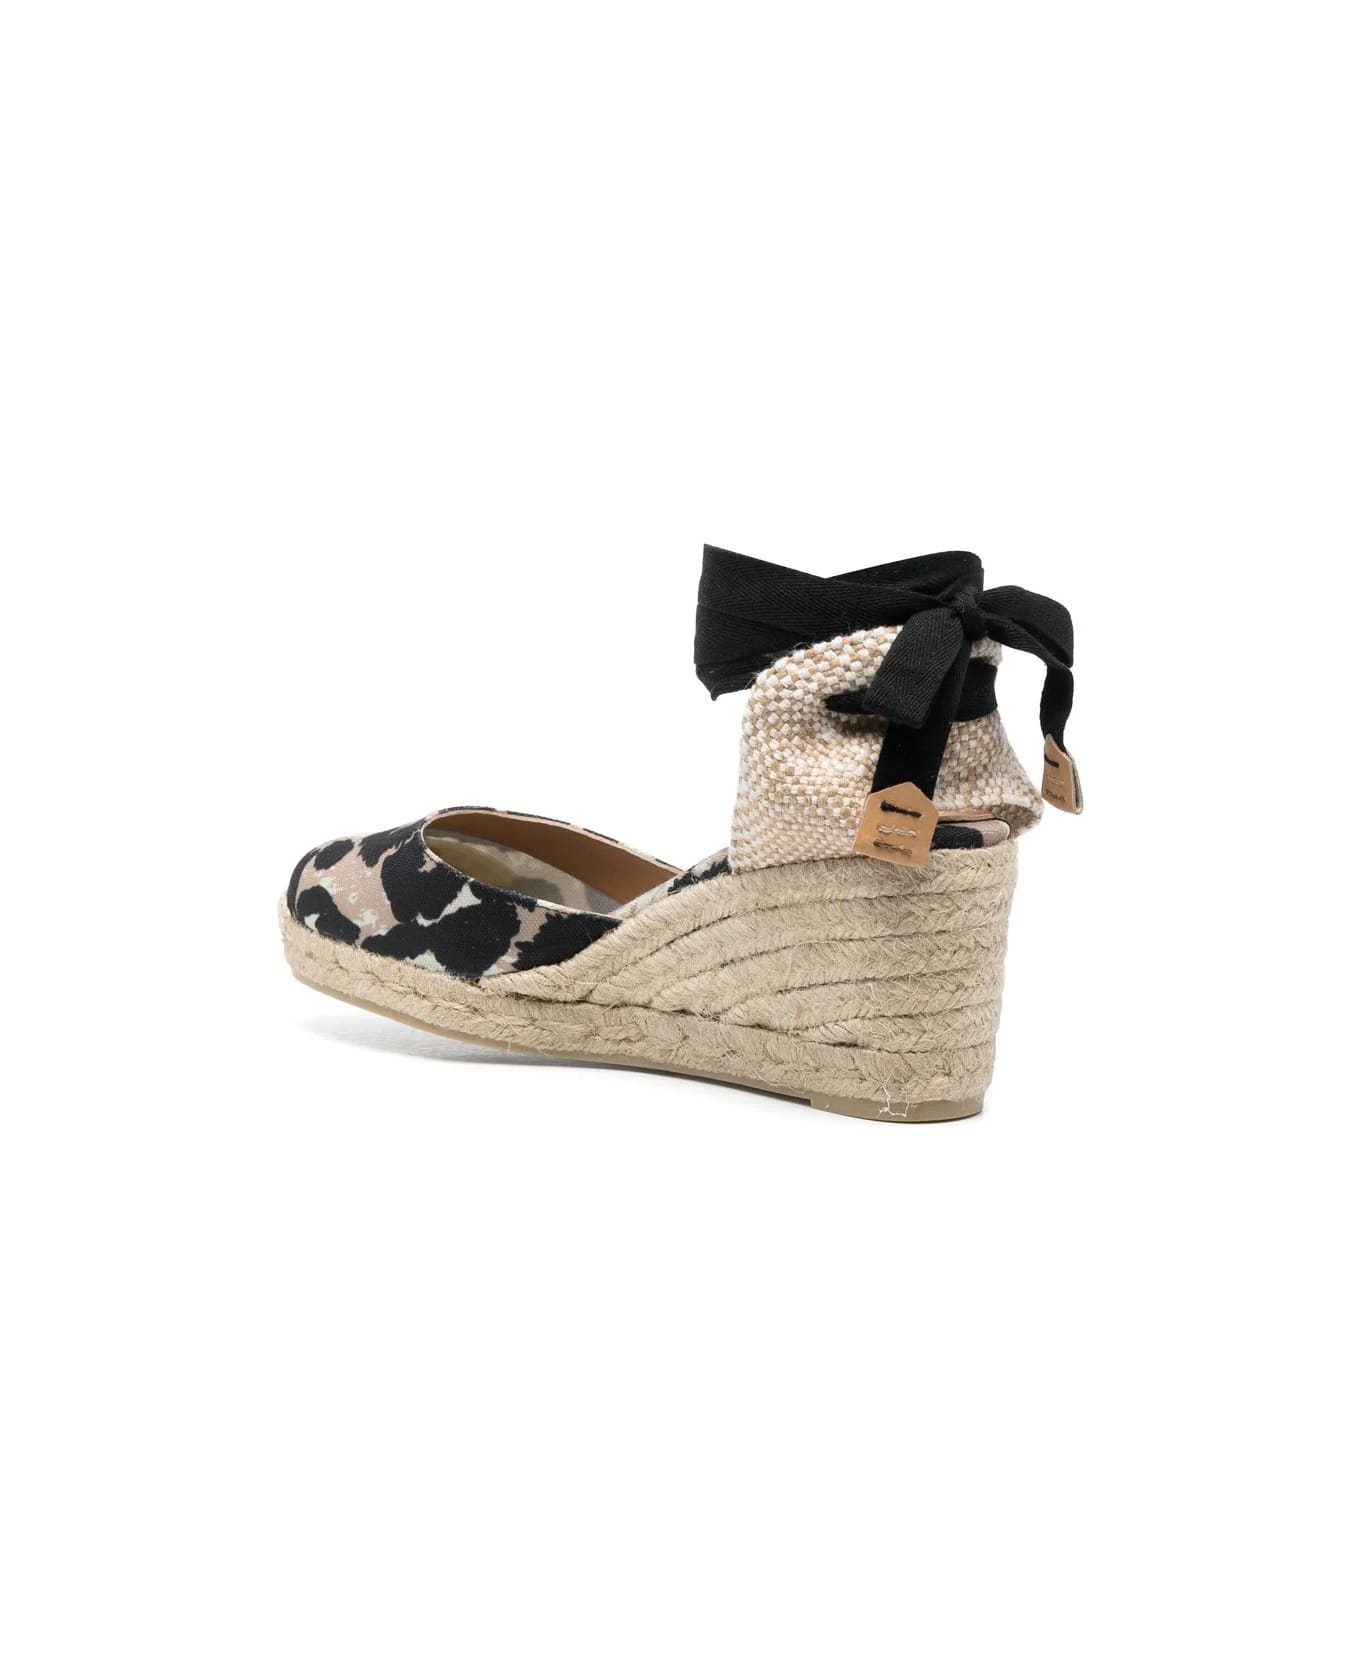 Castañer Carina Espadrilles With Laces On Ankles - Natural Black